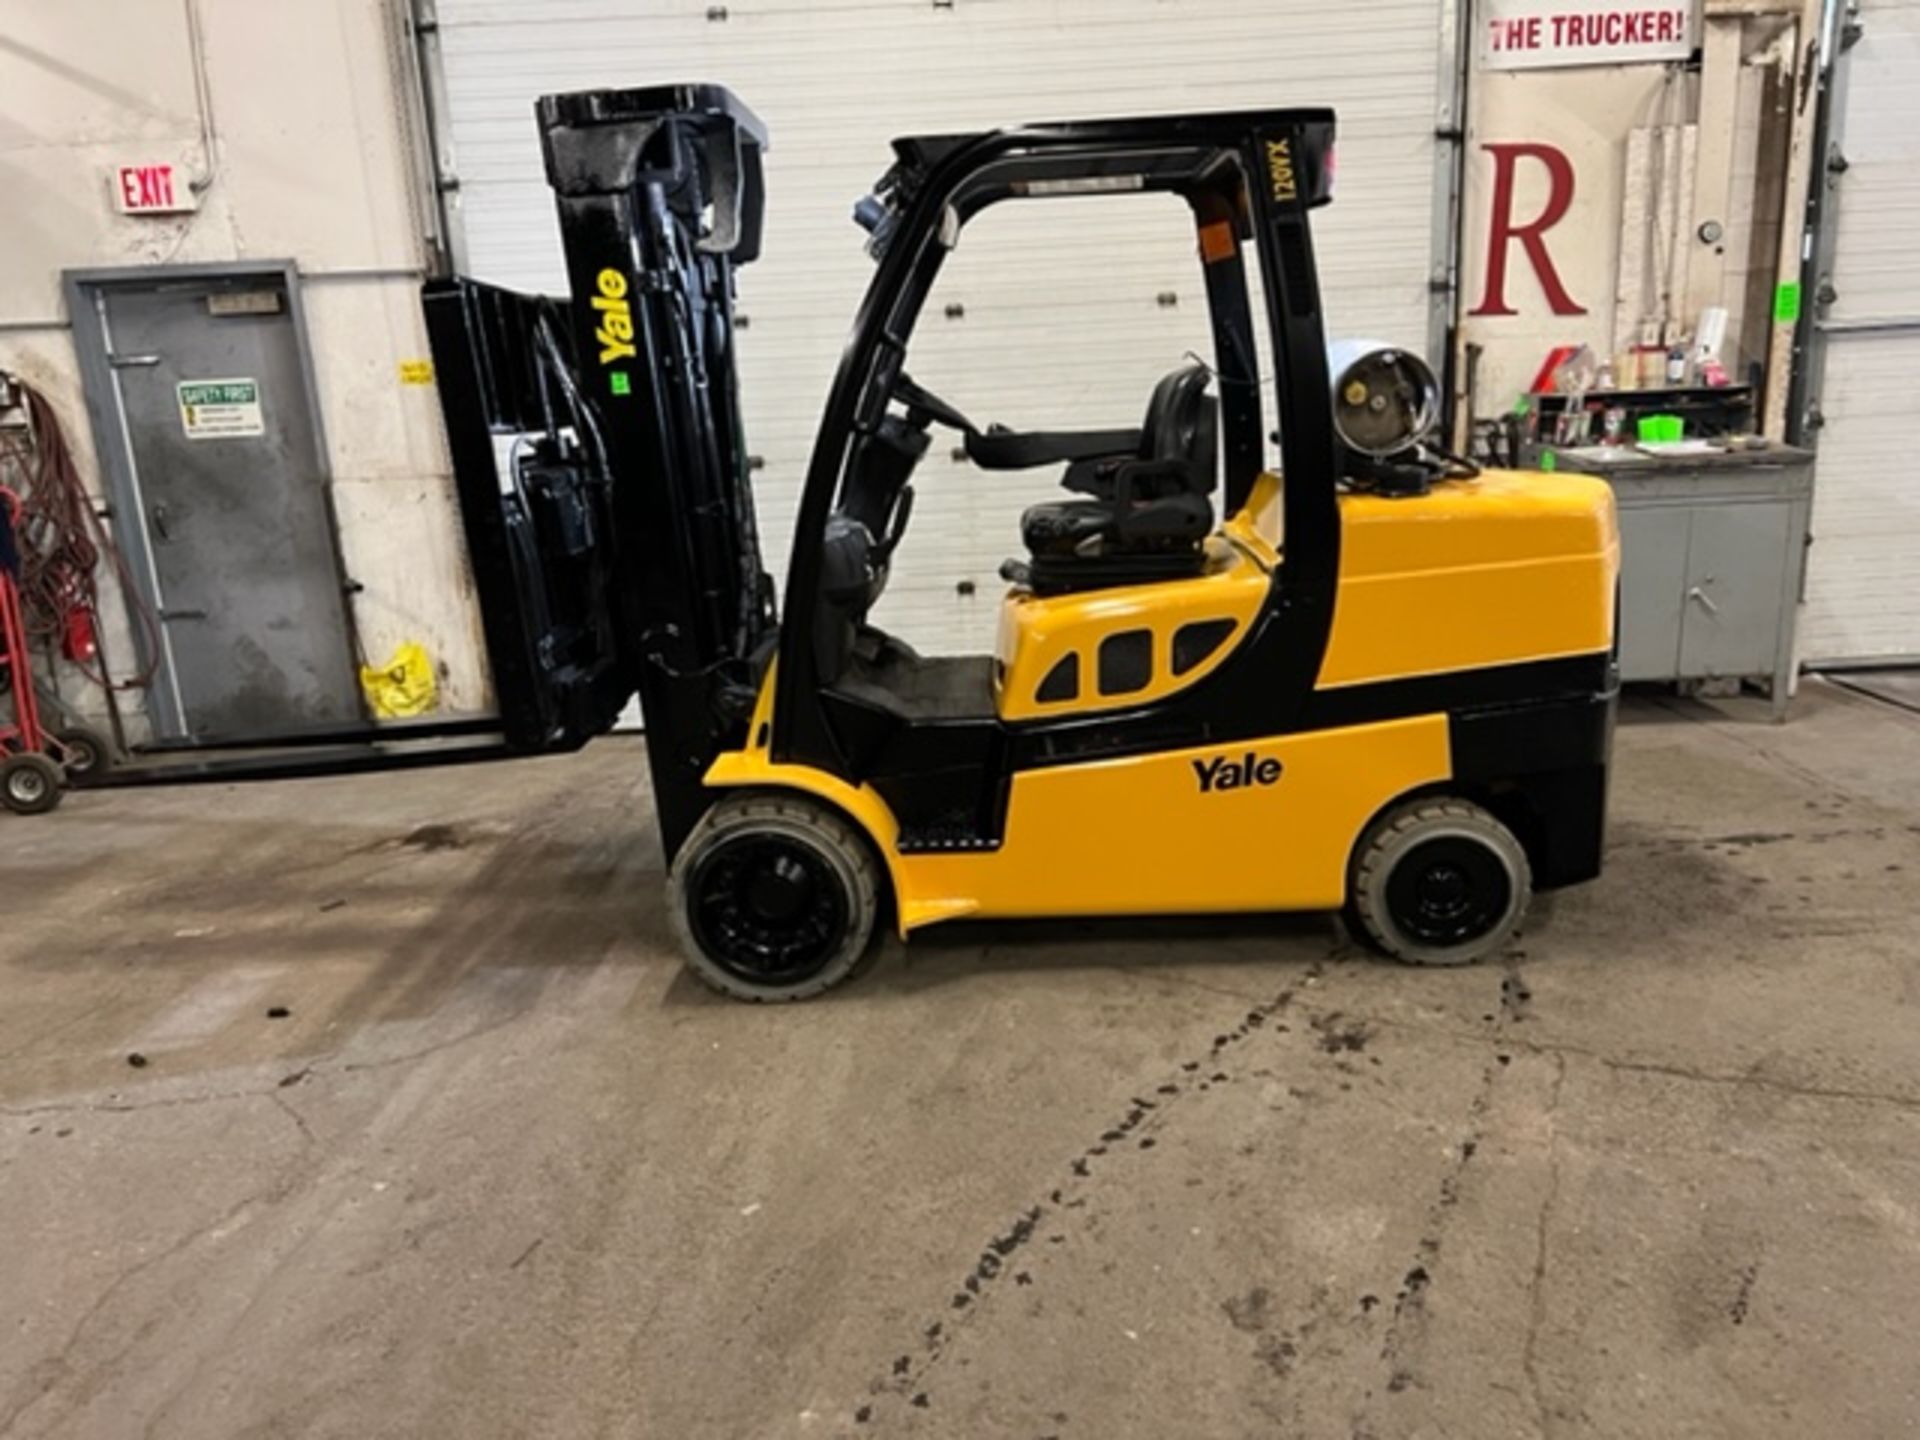 FREE CUSTOMS - NICE 2018 Yale model 120 - 12,000lbs Capacity Forklift LPG (propane) with 60" forks